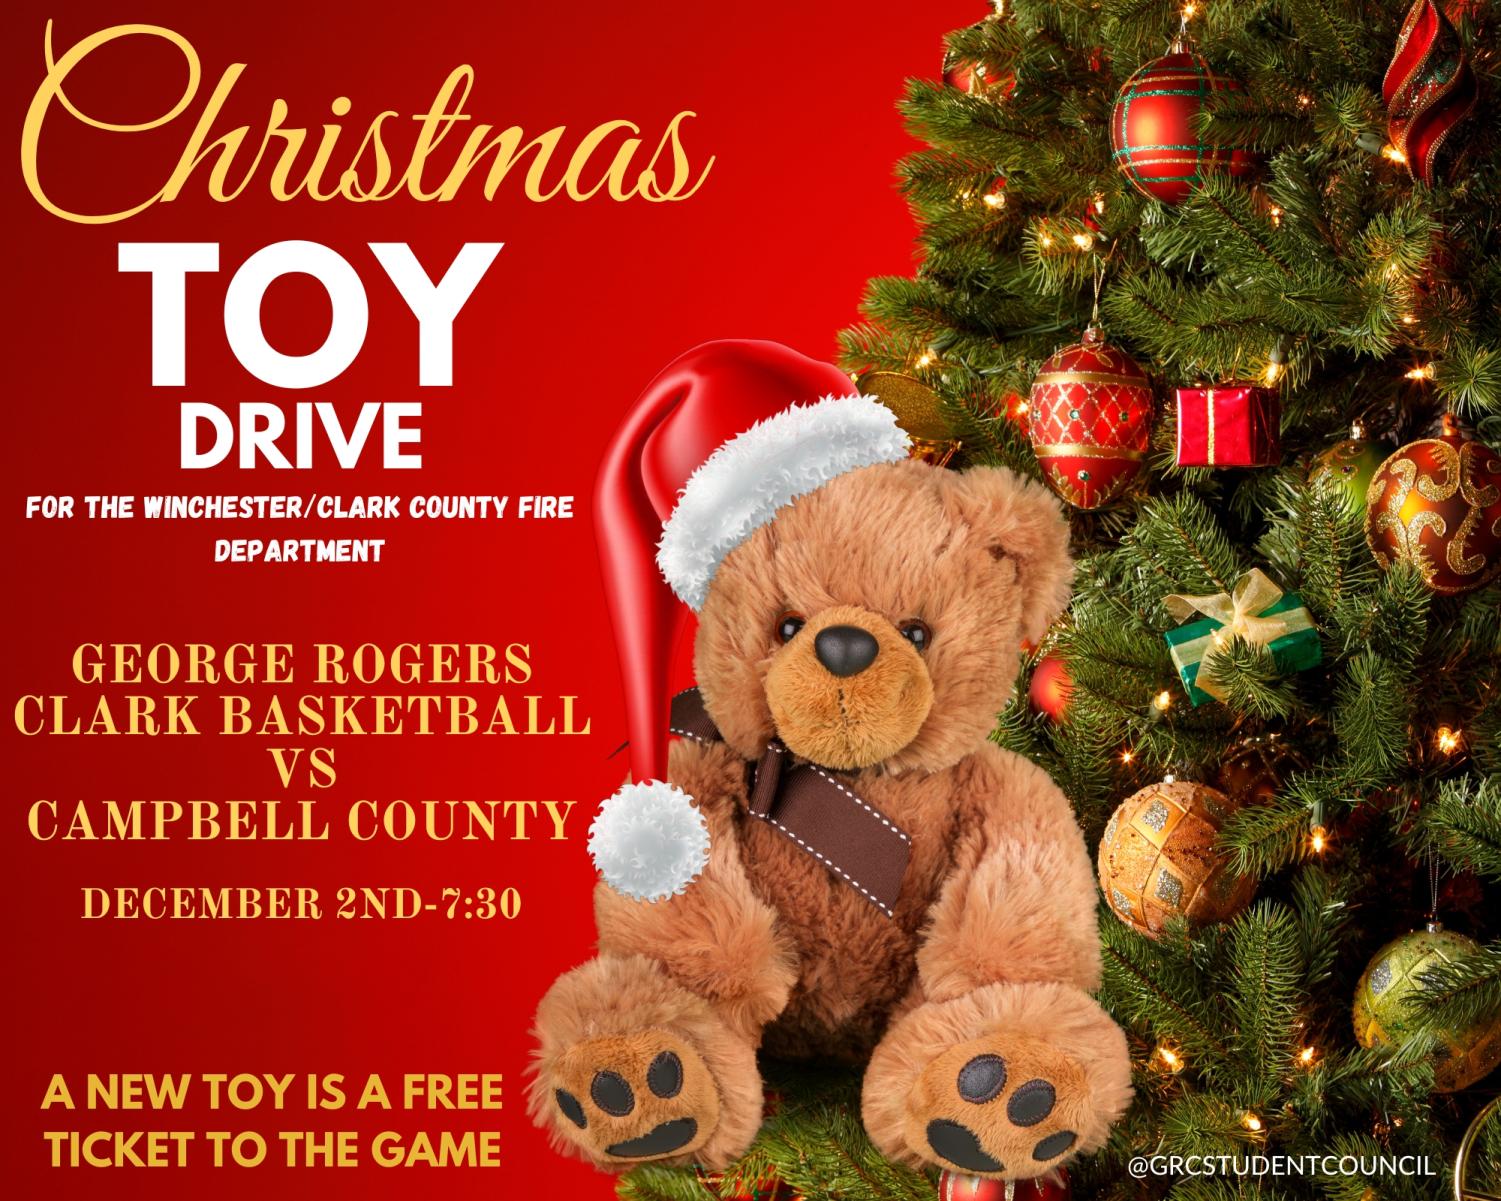 Two drives underway for gifts for seniors for Christmas, Local News